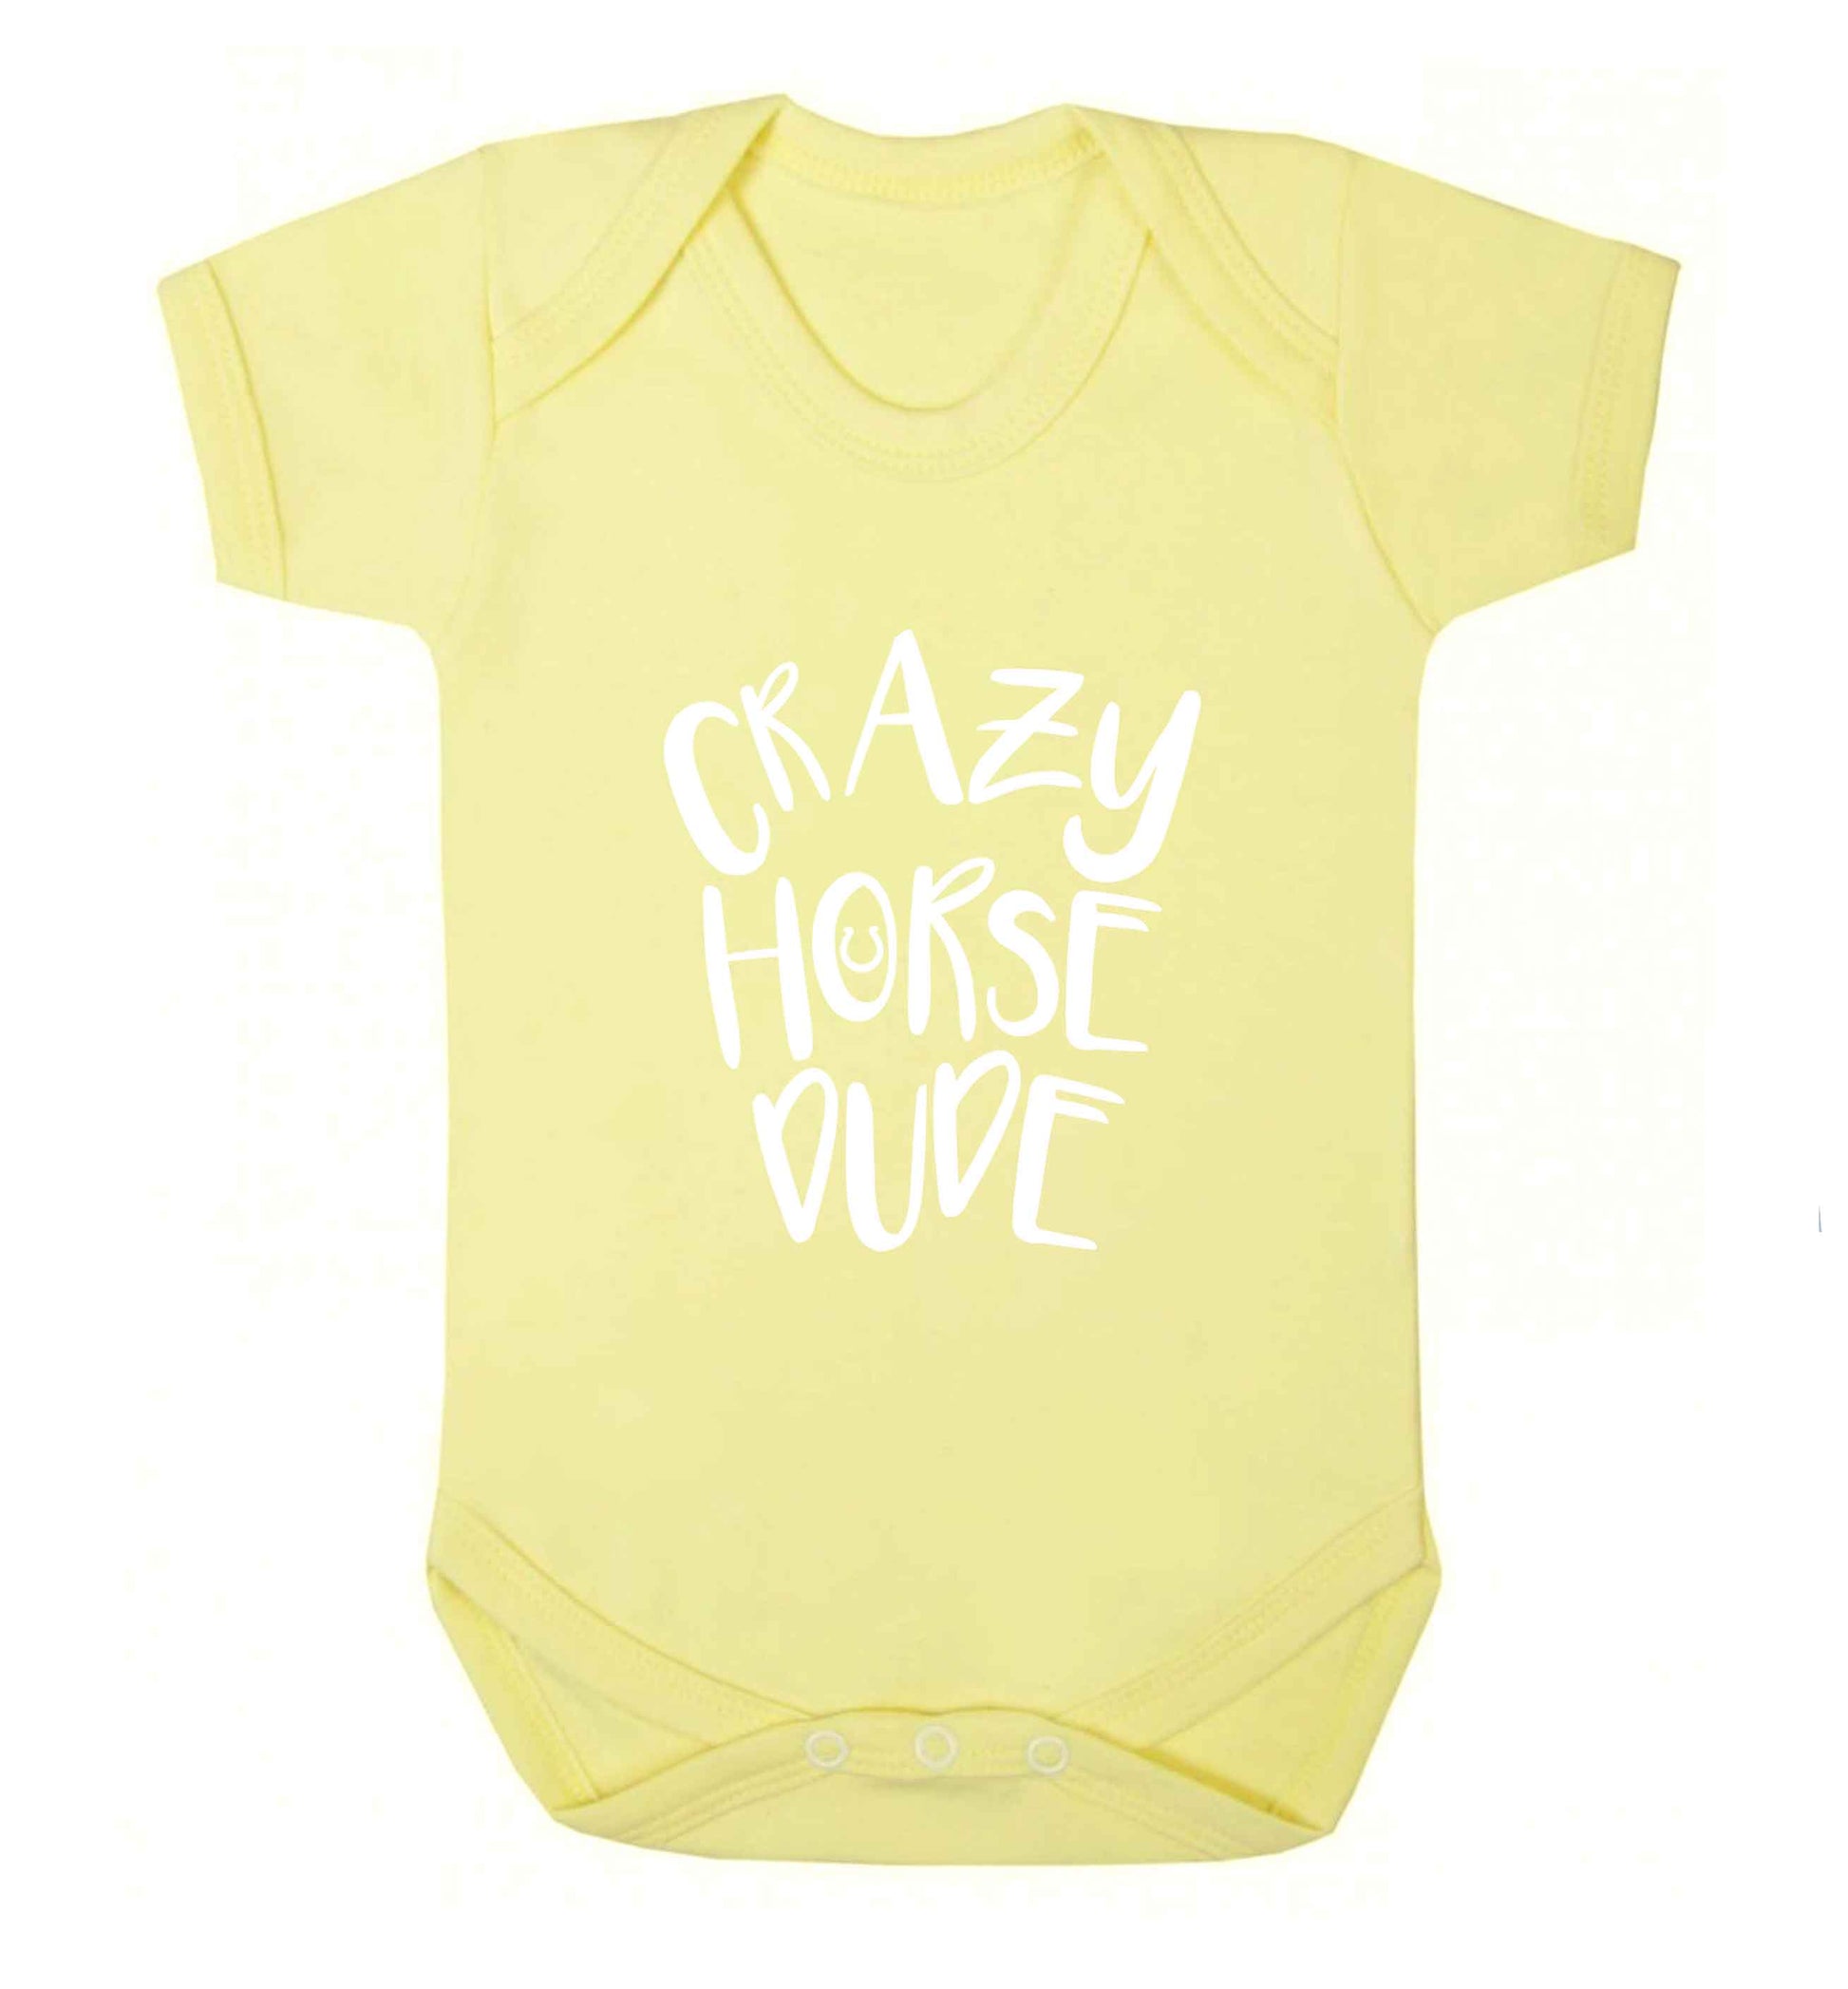 Crazy horse dude baby vest pale yellow 18-24 months